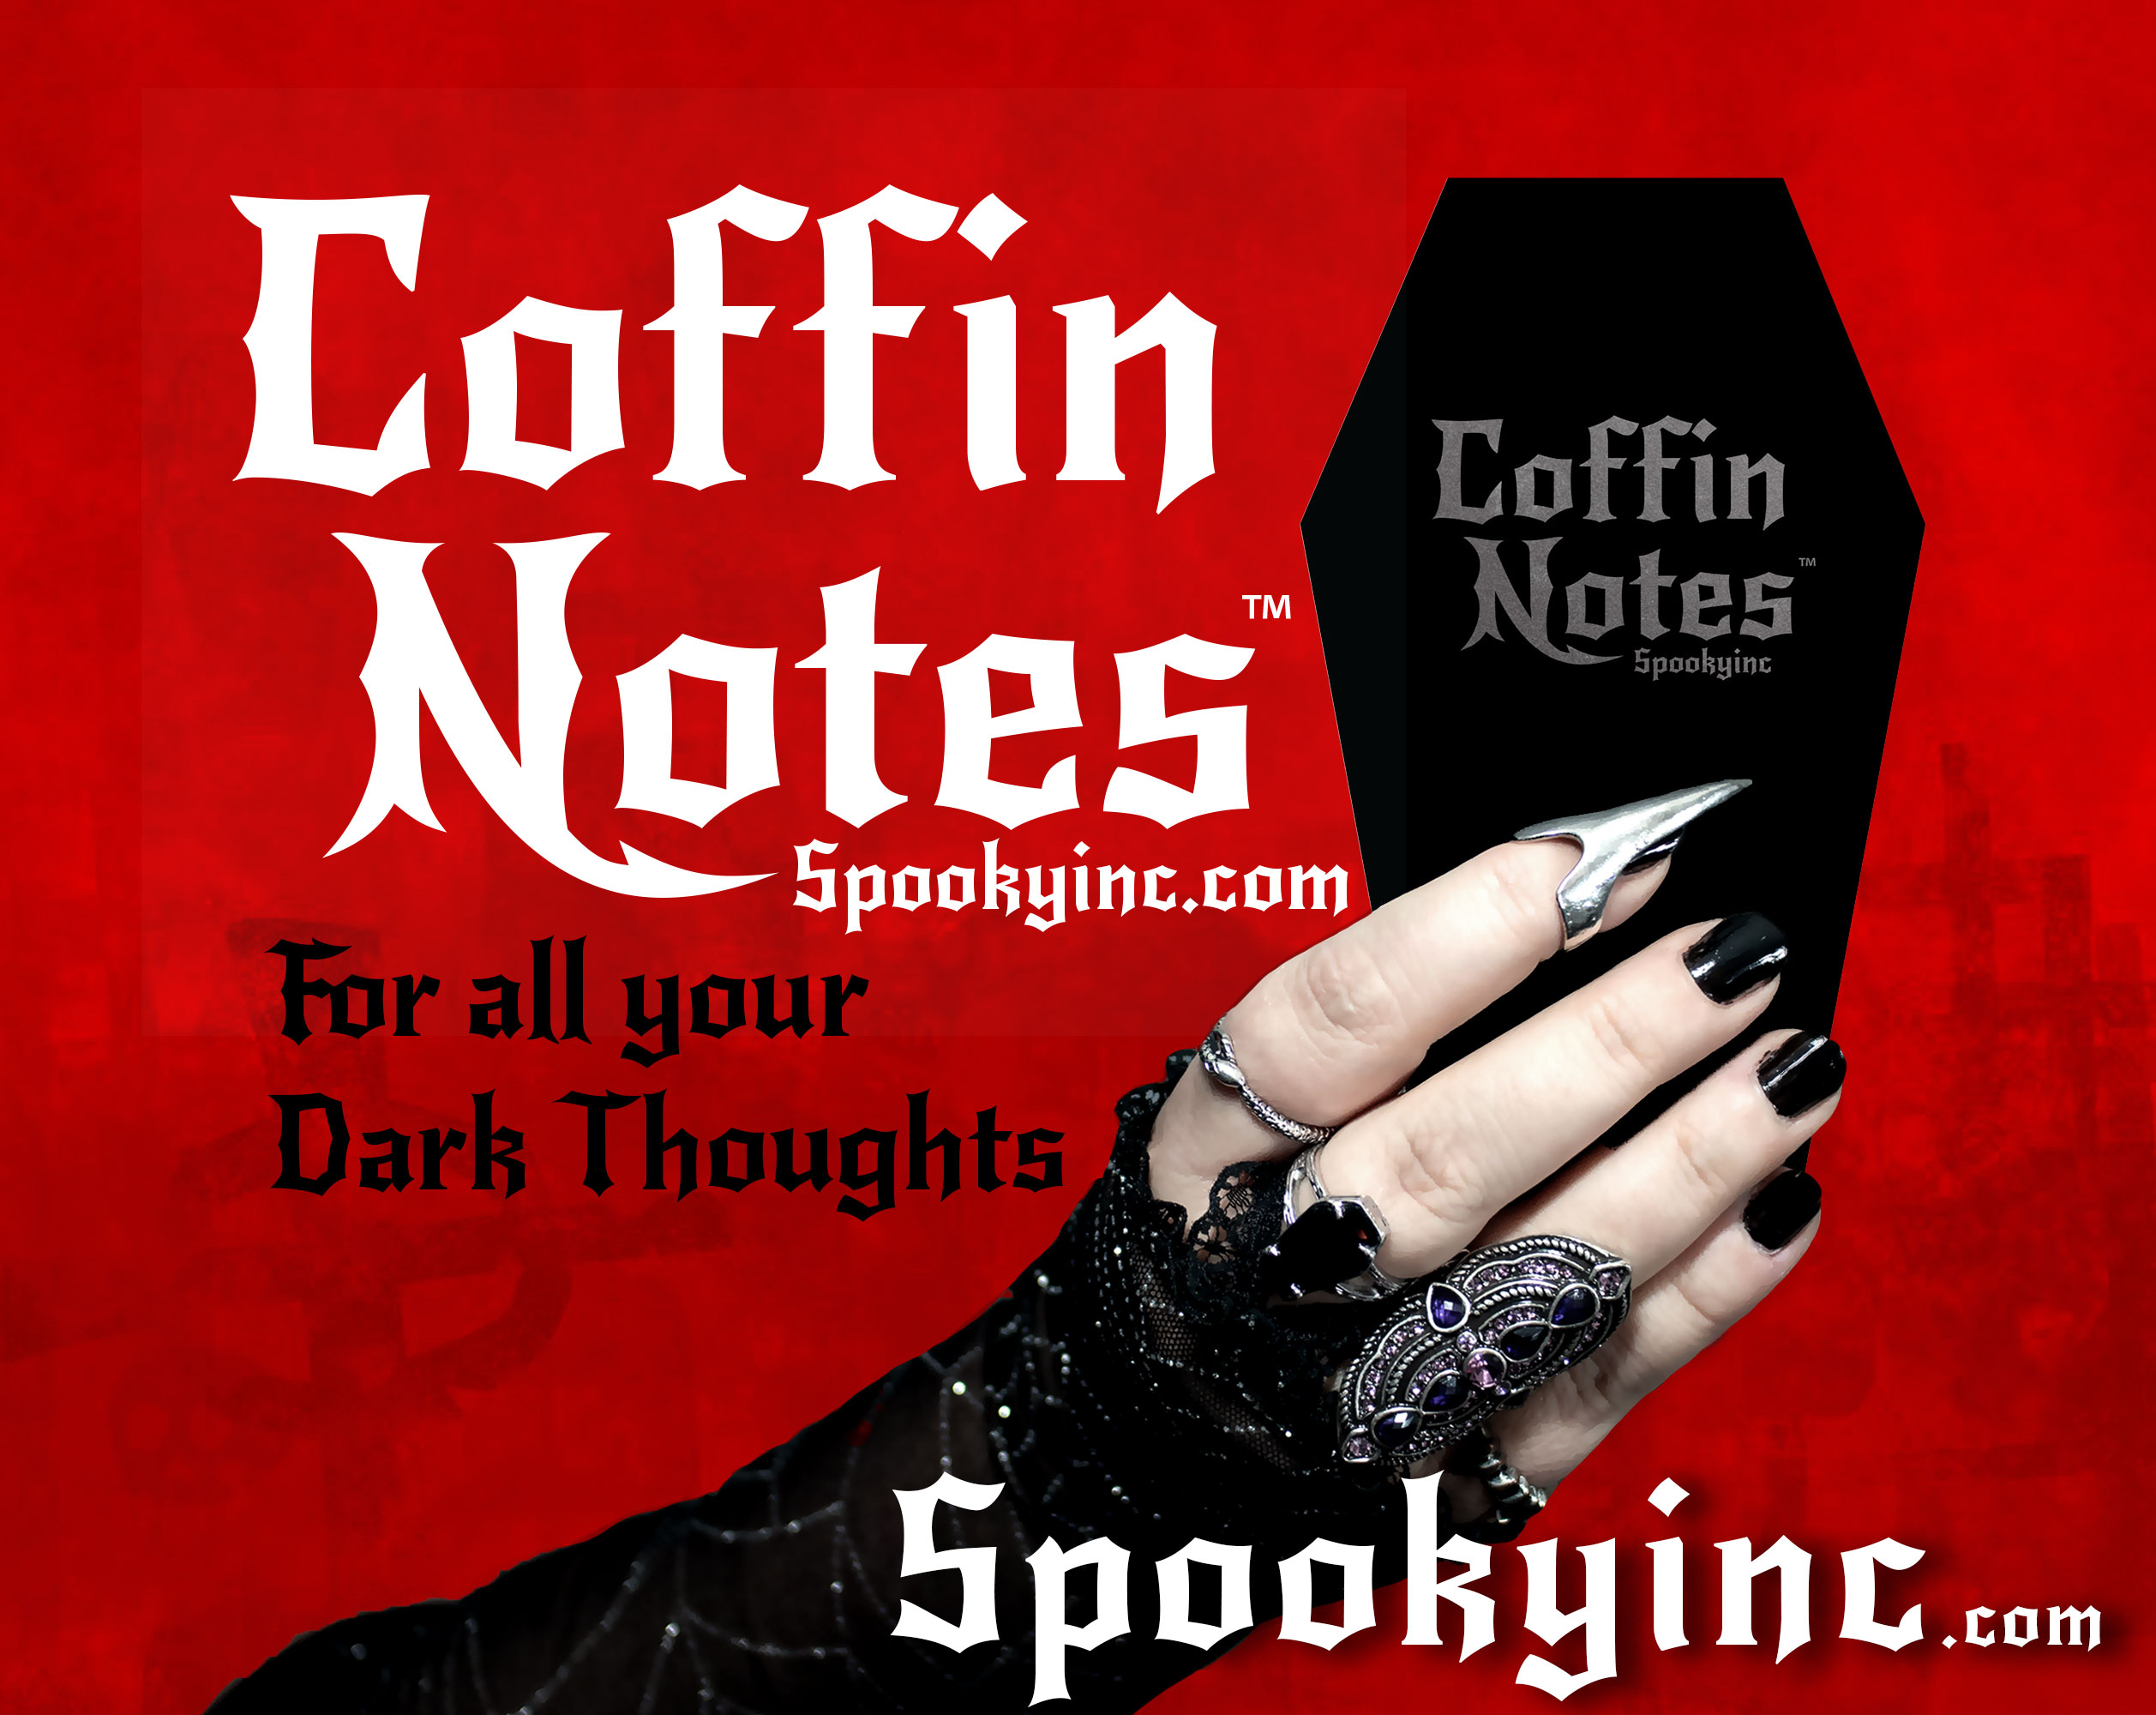 CoffinNotes now available!